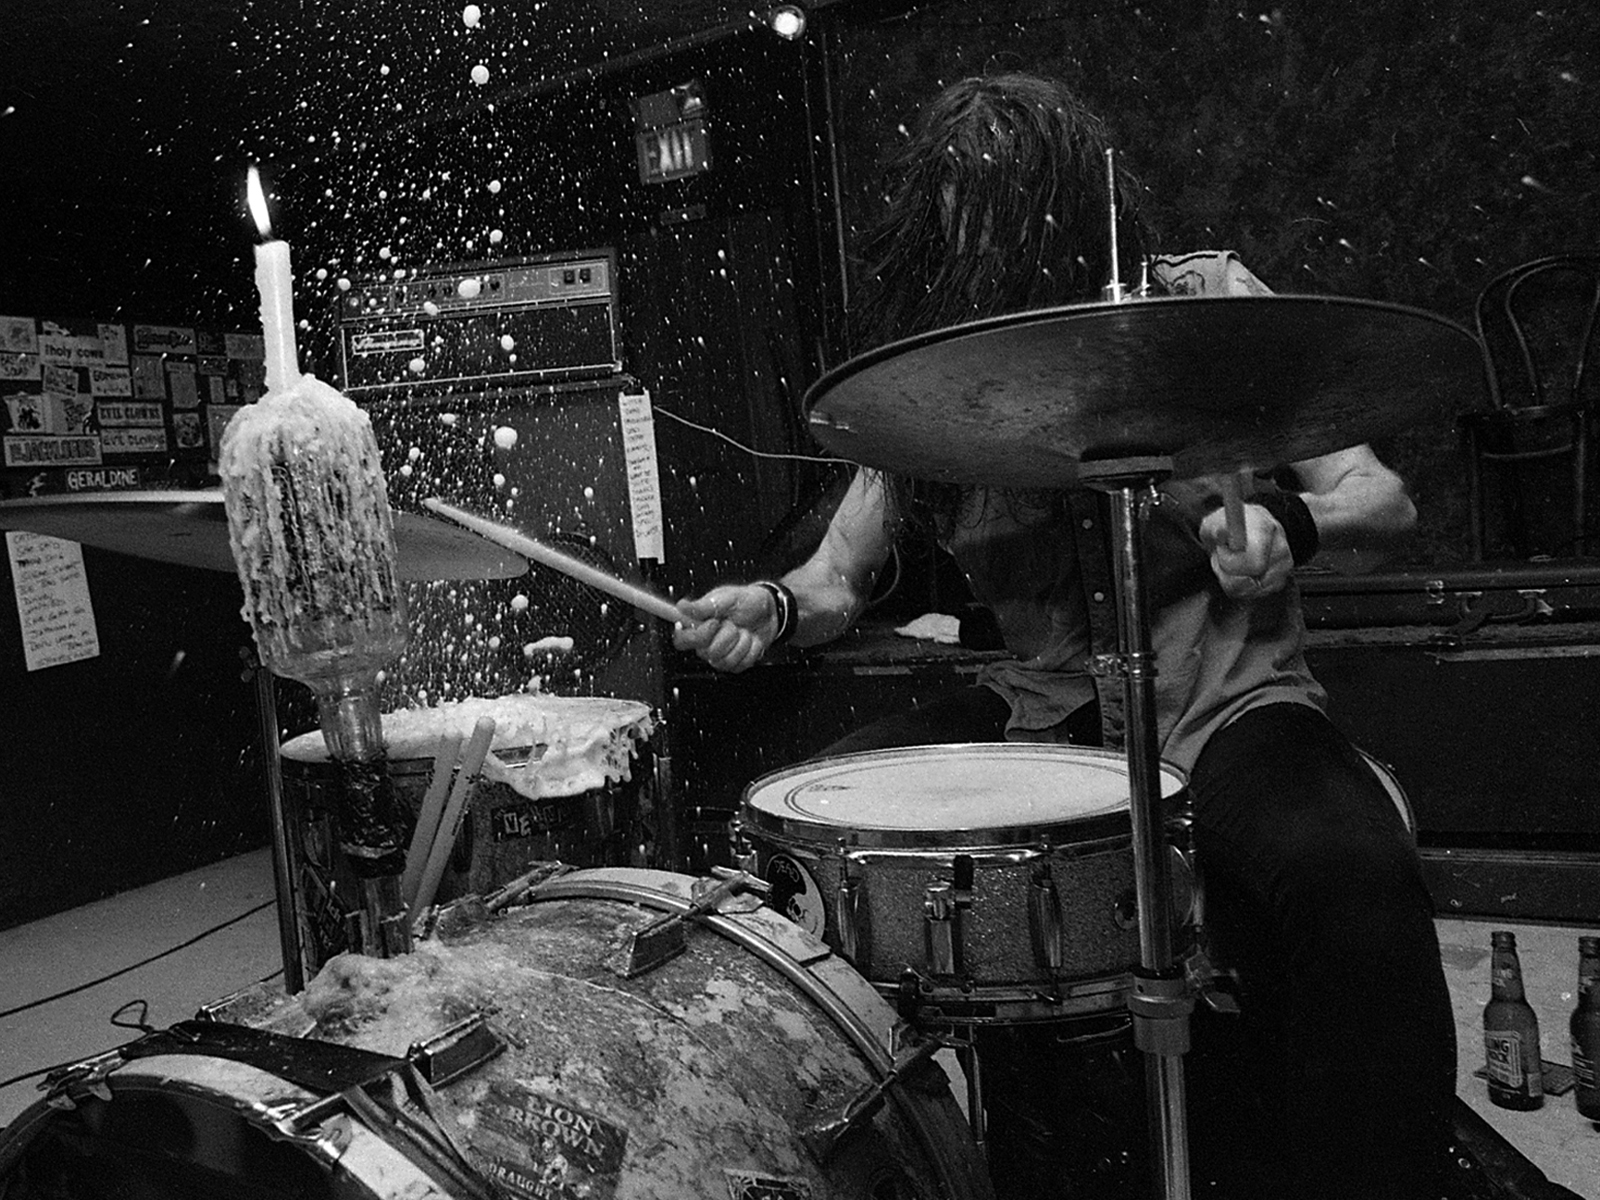 Dead Moon at Pat's in the Flats in Cleveland, Ohio, 1998